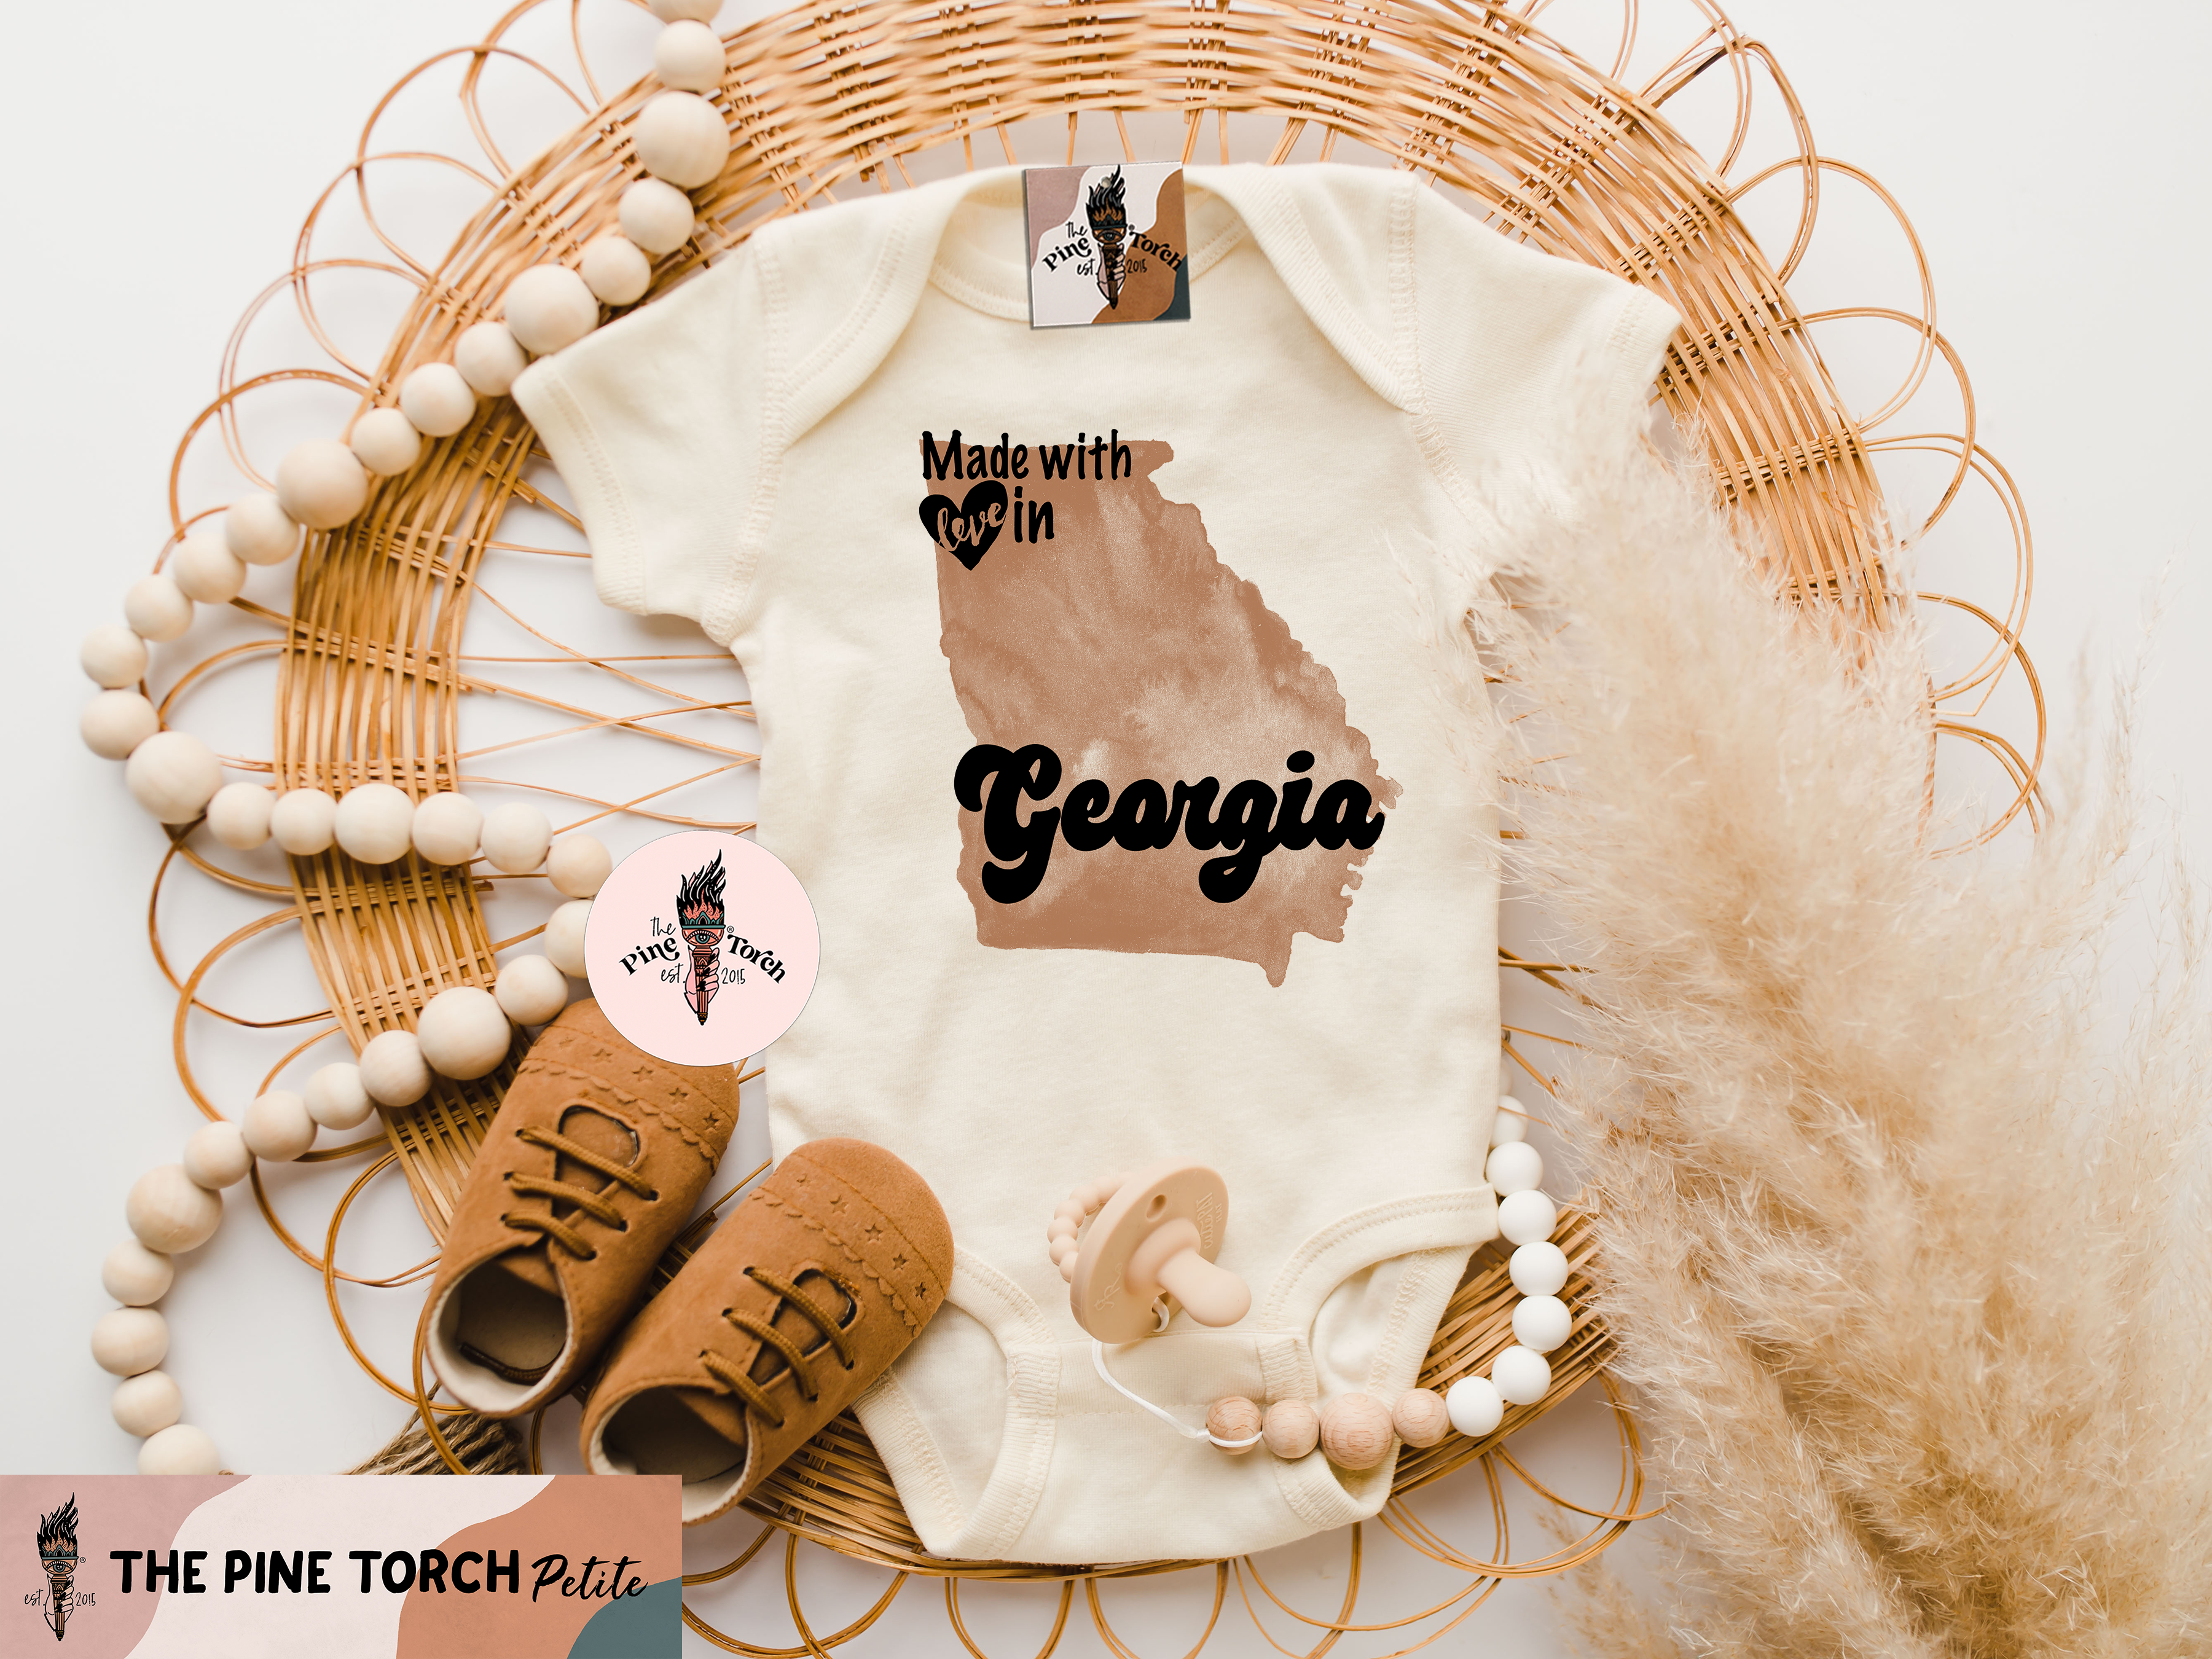 « MADE WITH LOVE IN GEORGIA » BODYSUIT